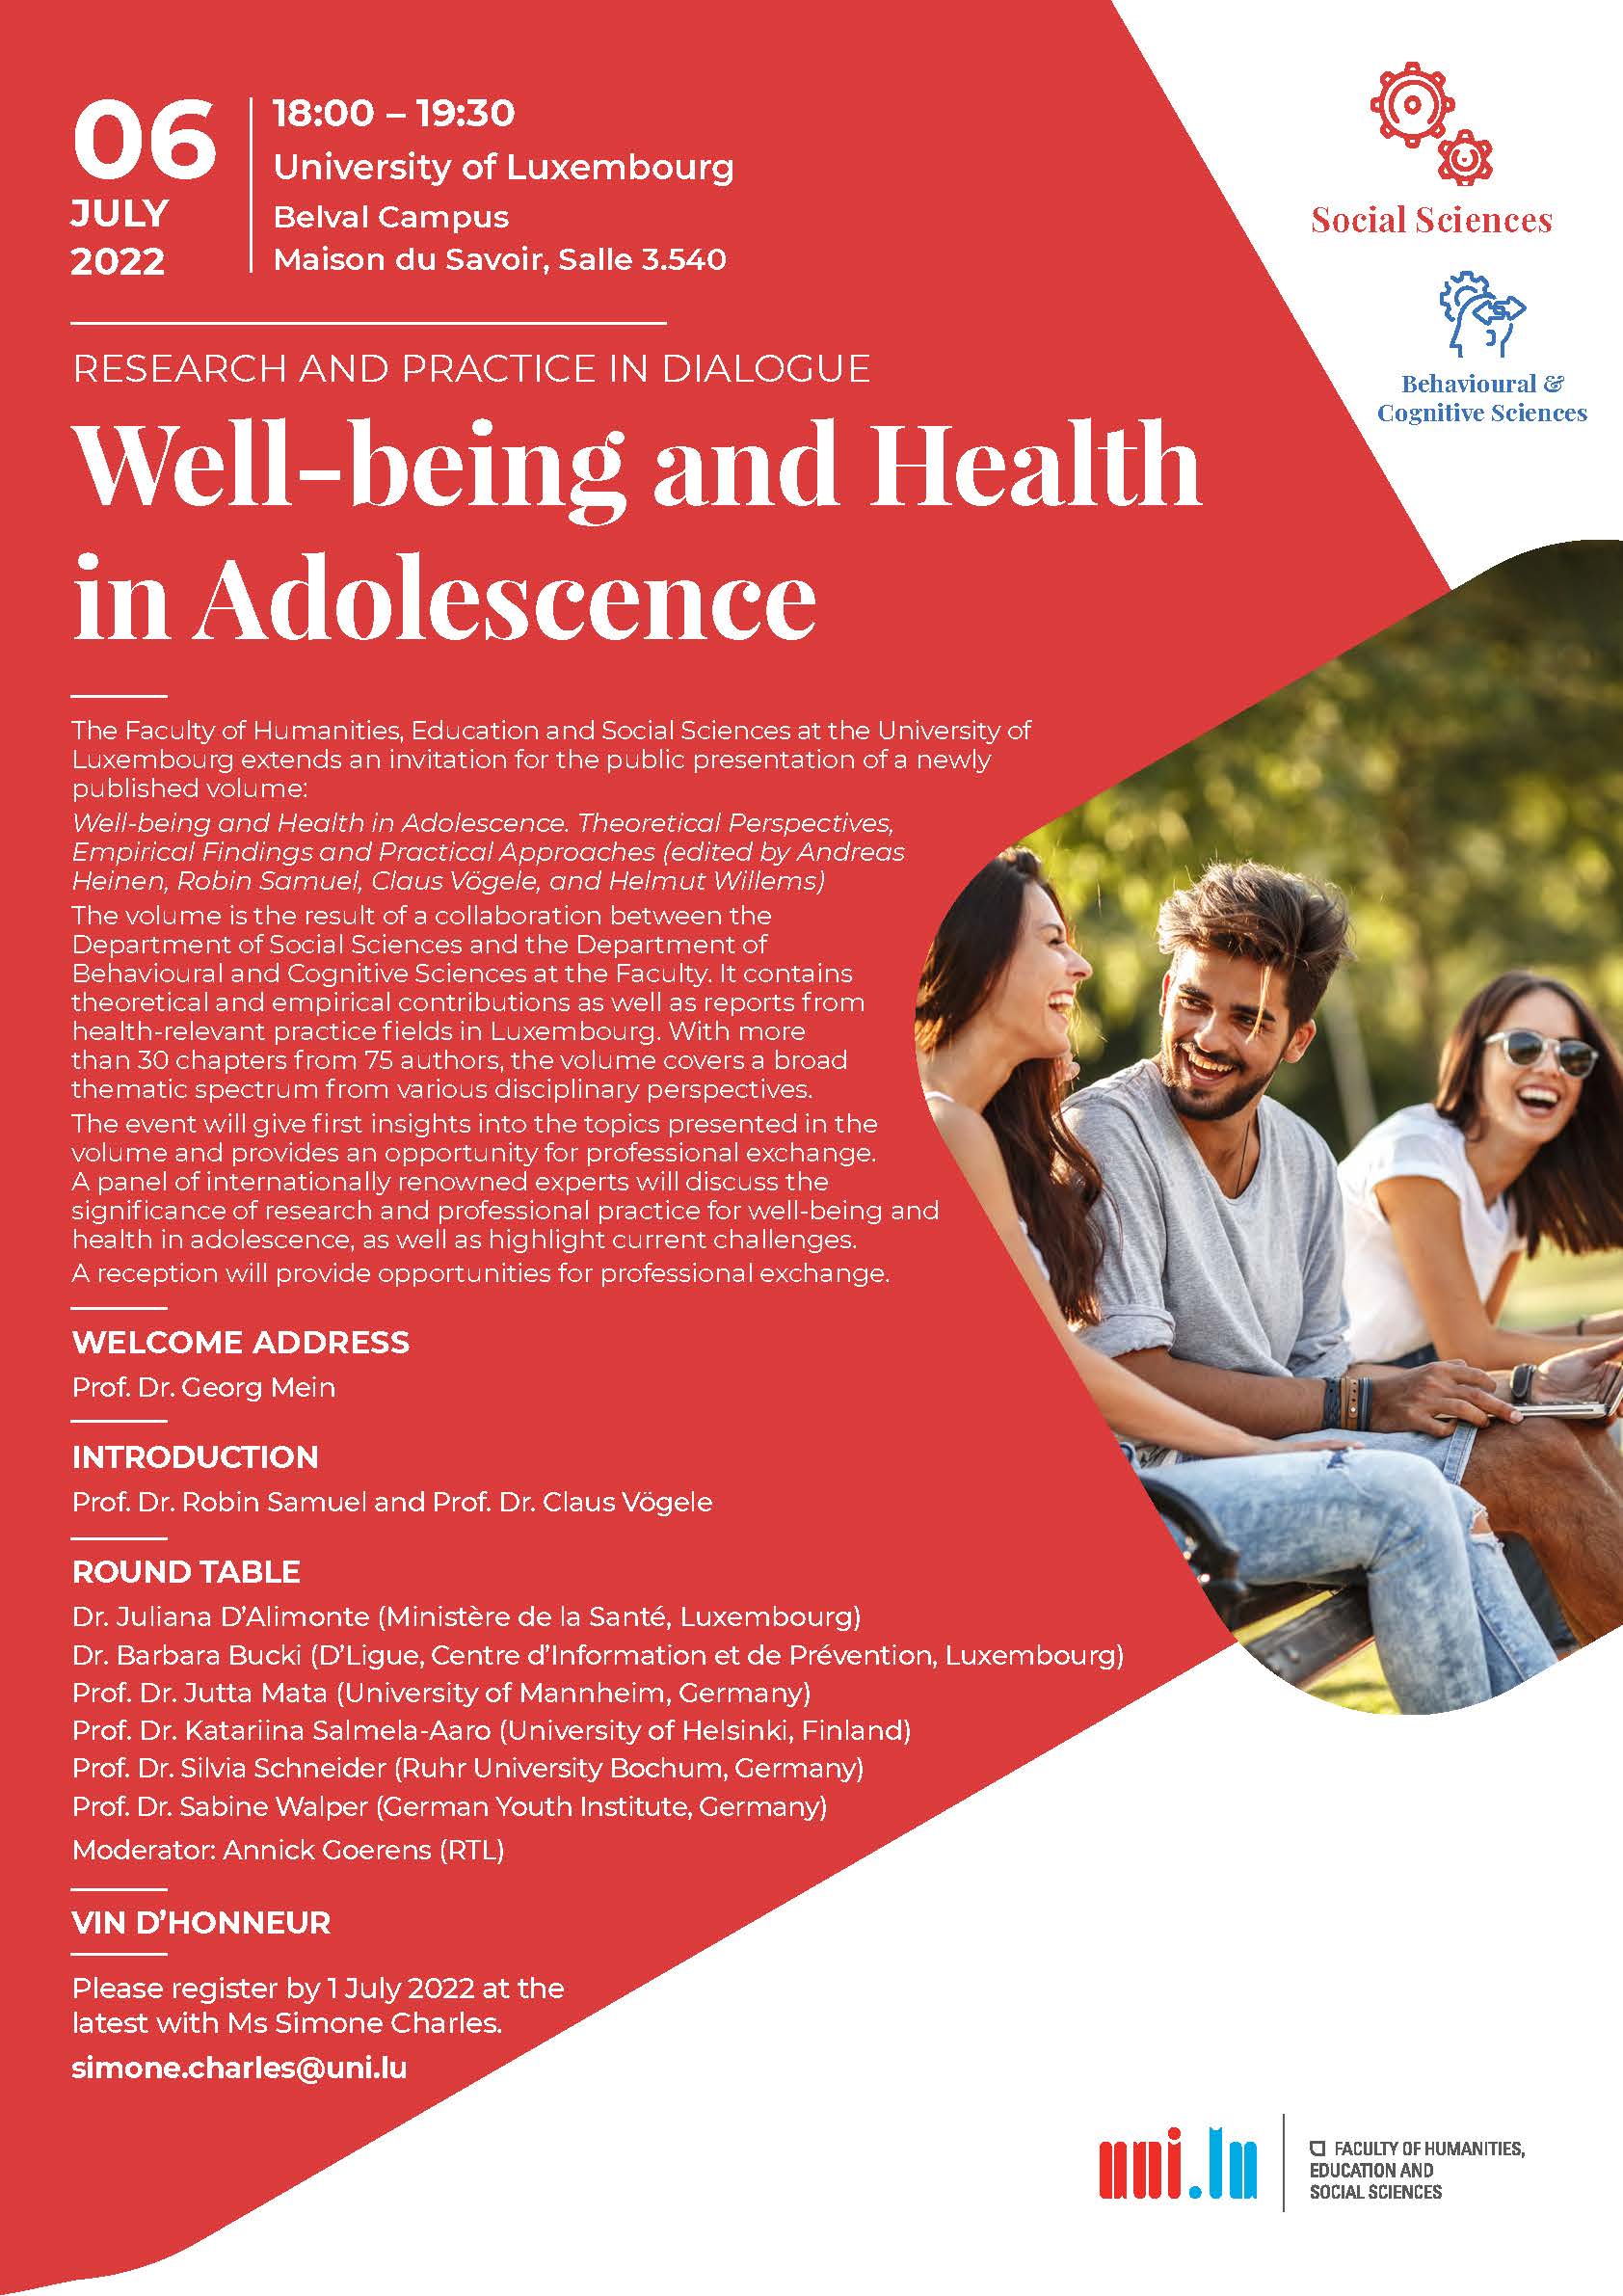 Well-being and health in adolescence